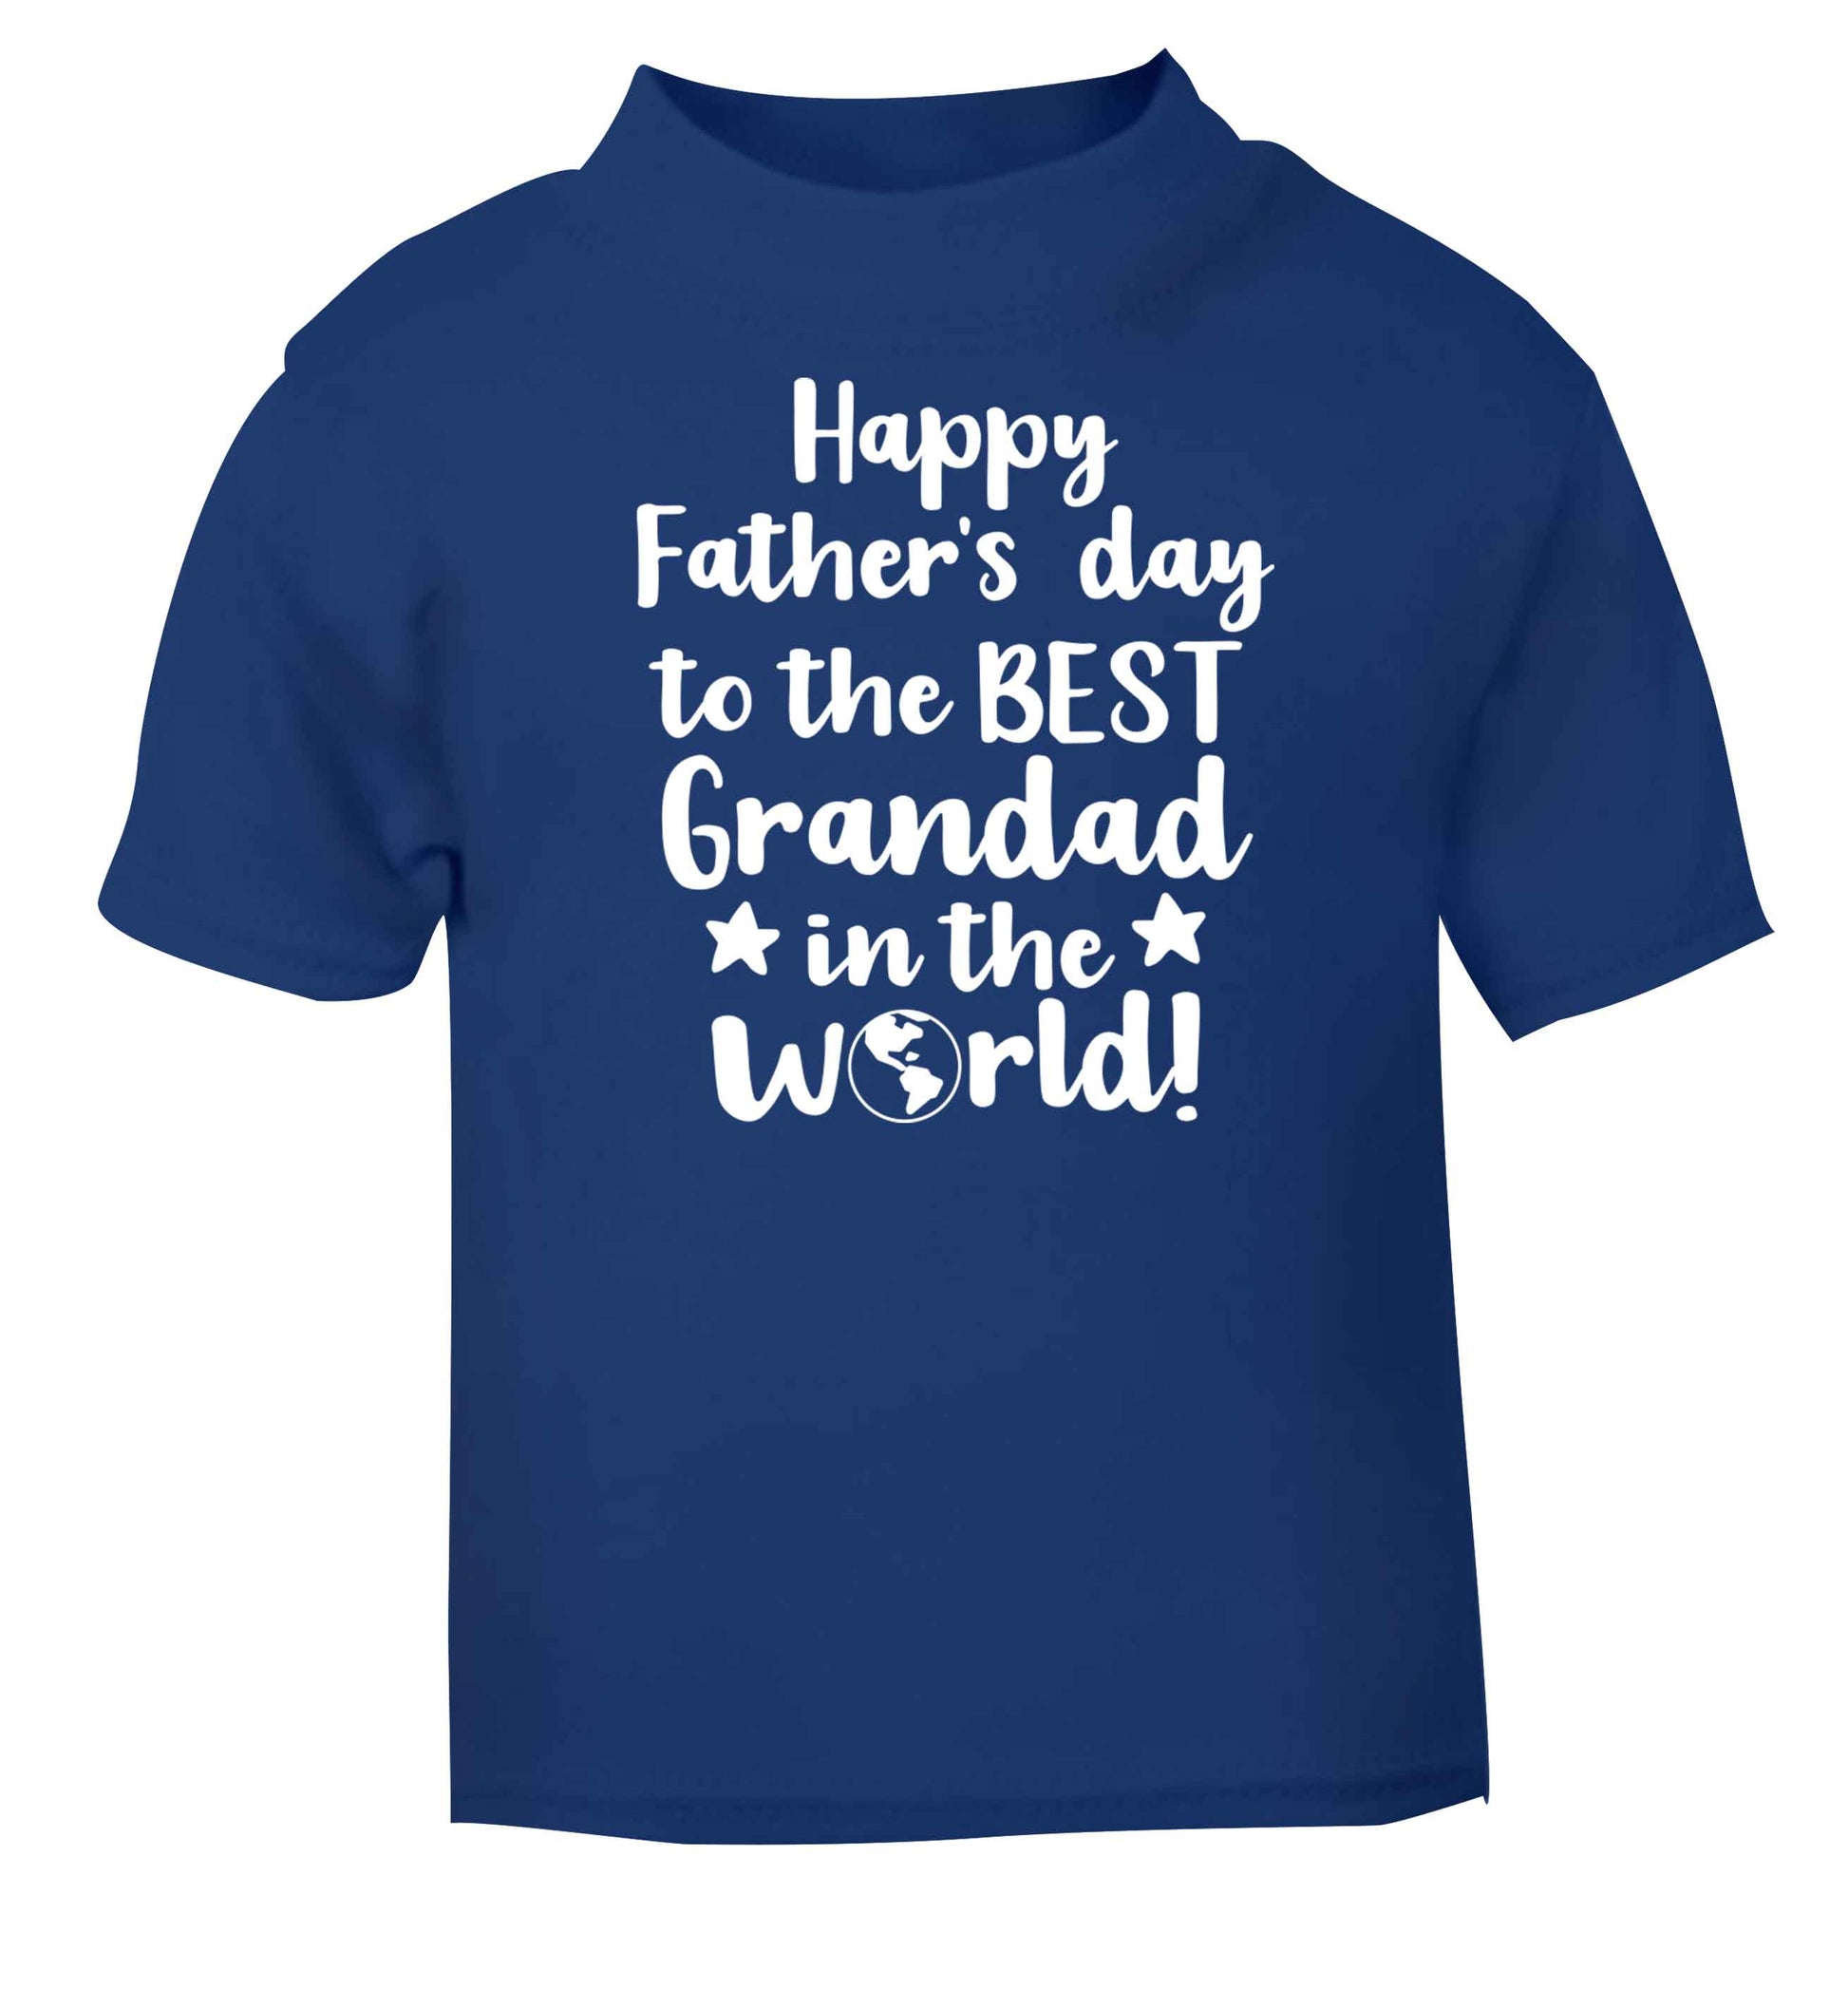 Happy Father's day to the best grandad in the world blue baby toddler Tshirt 2 Years